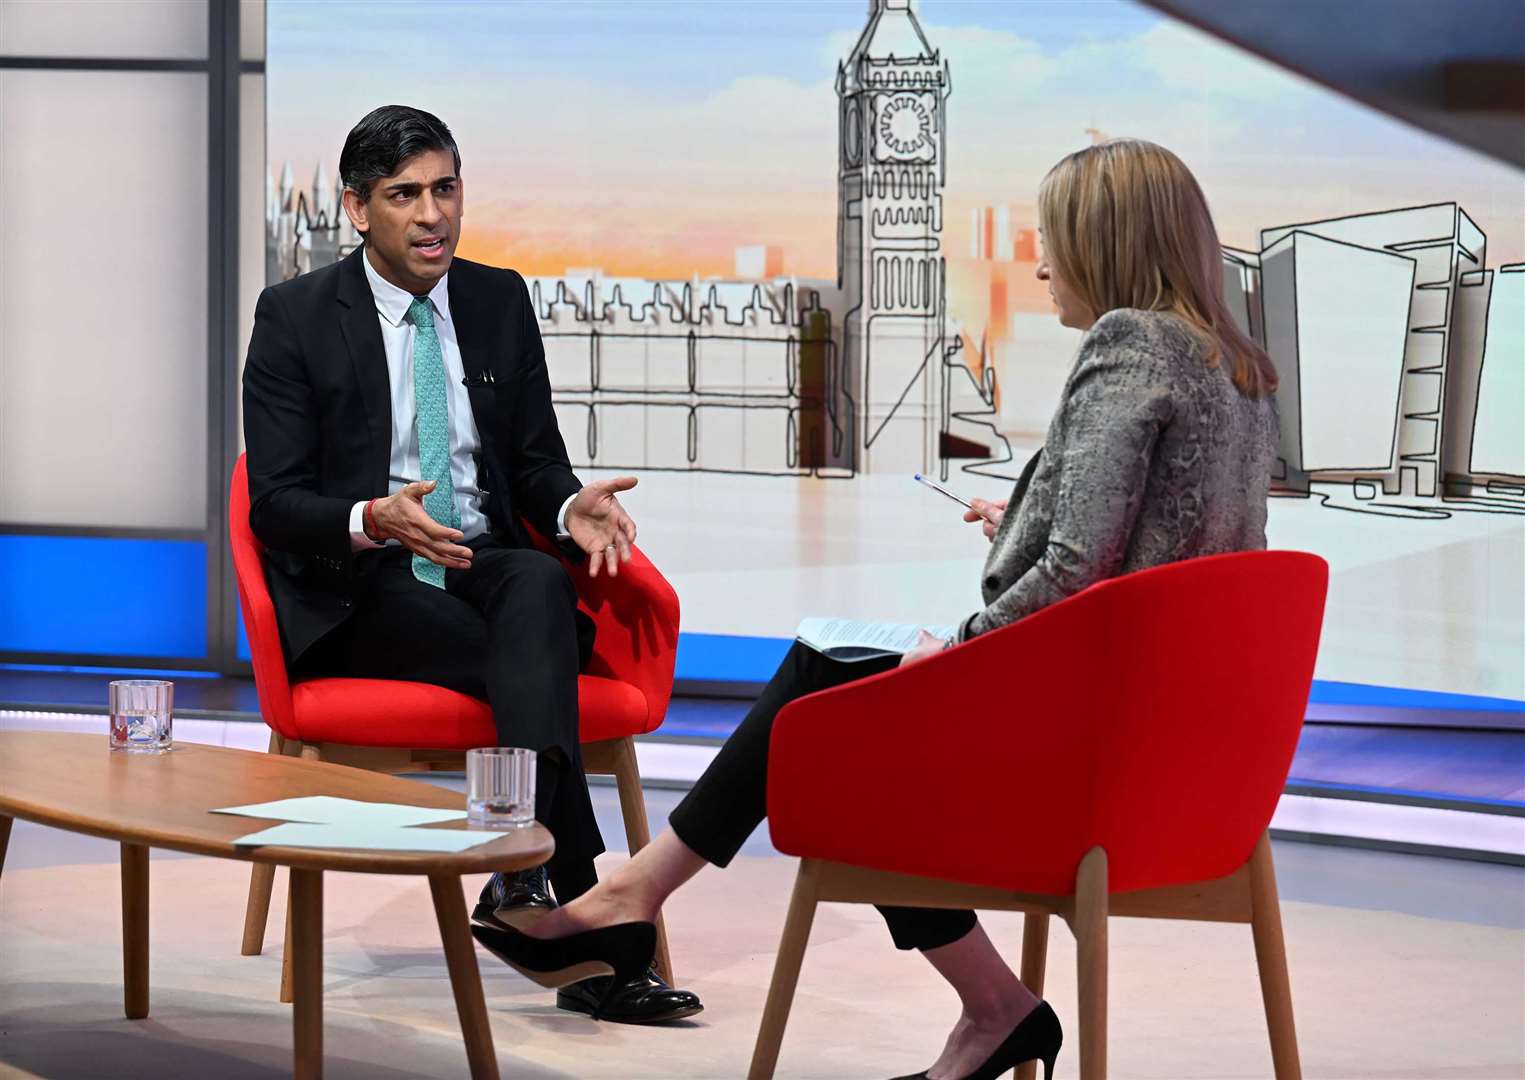 Prime Minister Rishi Sunak appeared on the BBC One current affairs programme, Sunday with Laura Kuenssberg (Jeff Overs/BBC/PA)